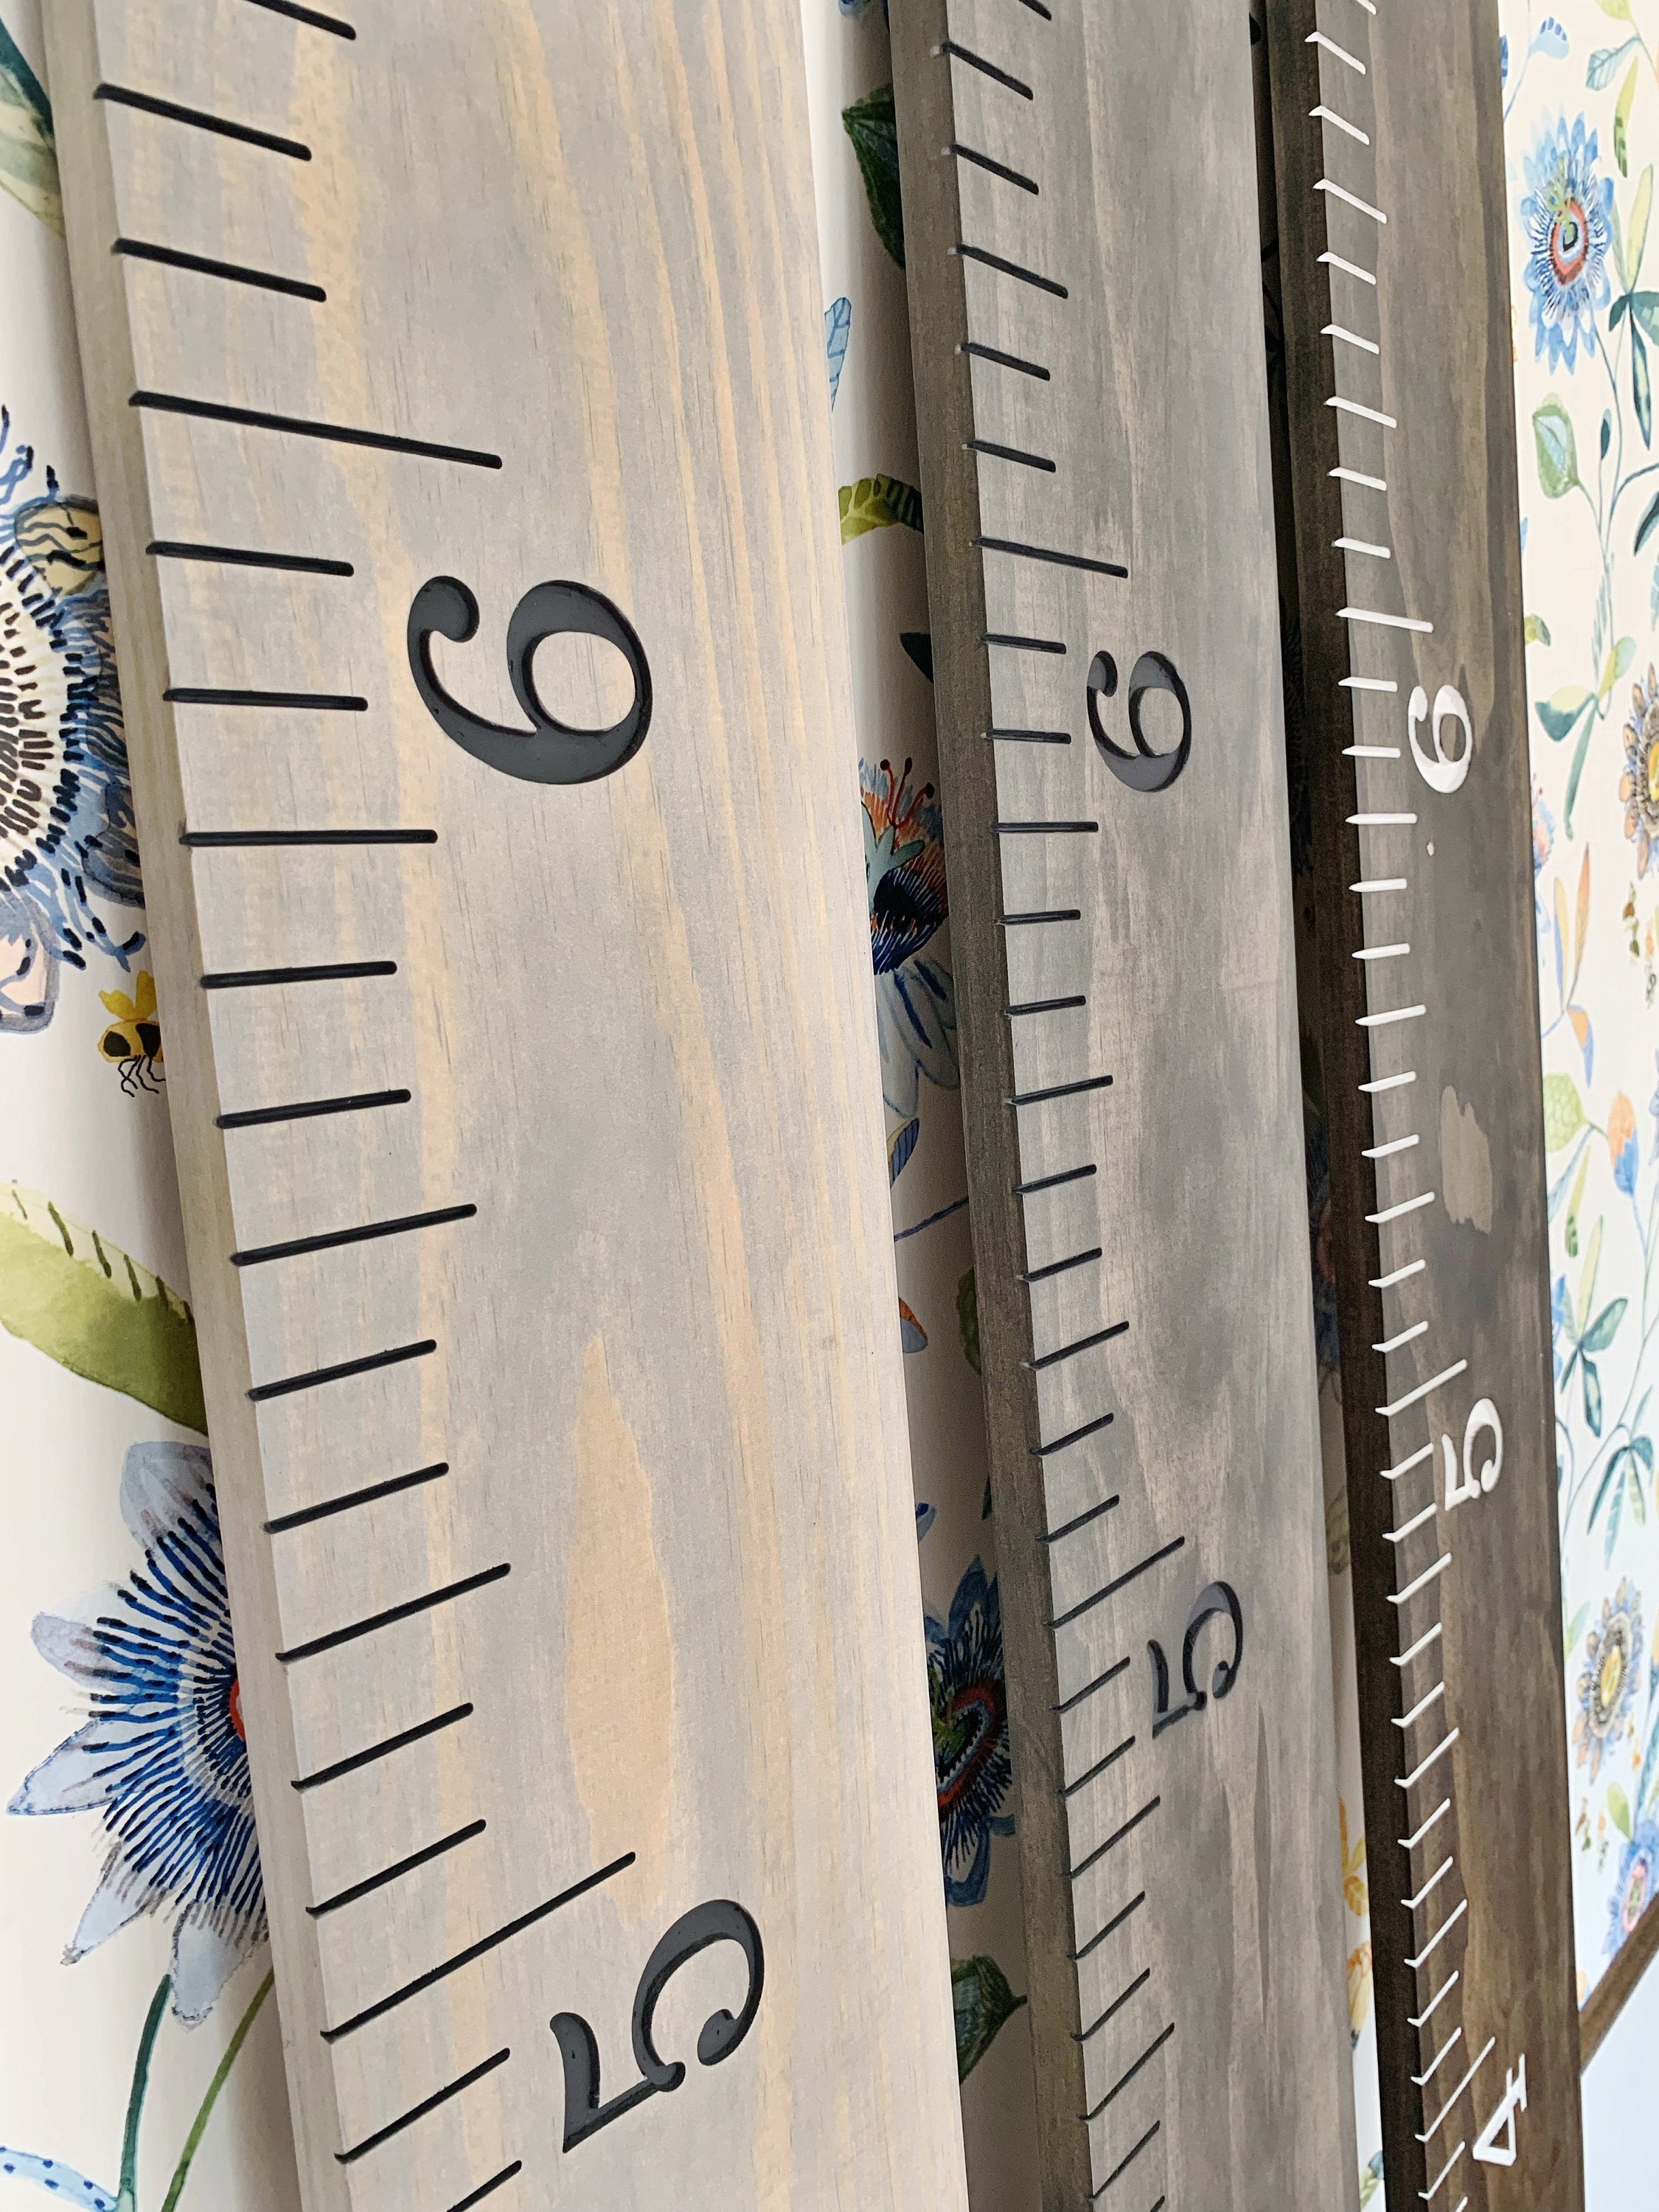 6 Inch Ruler Measurements, Engraved Growth Chart, Half Pint Ink